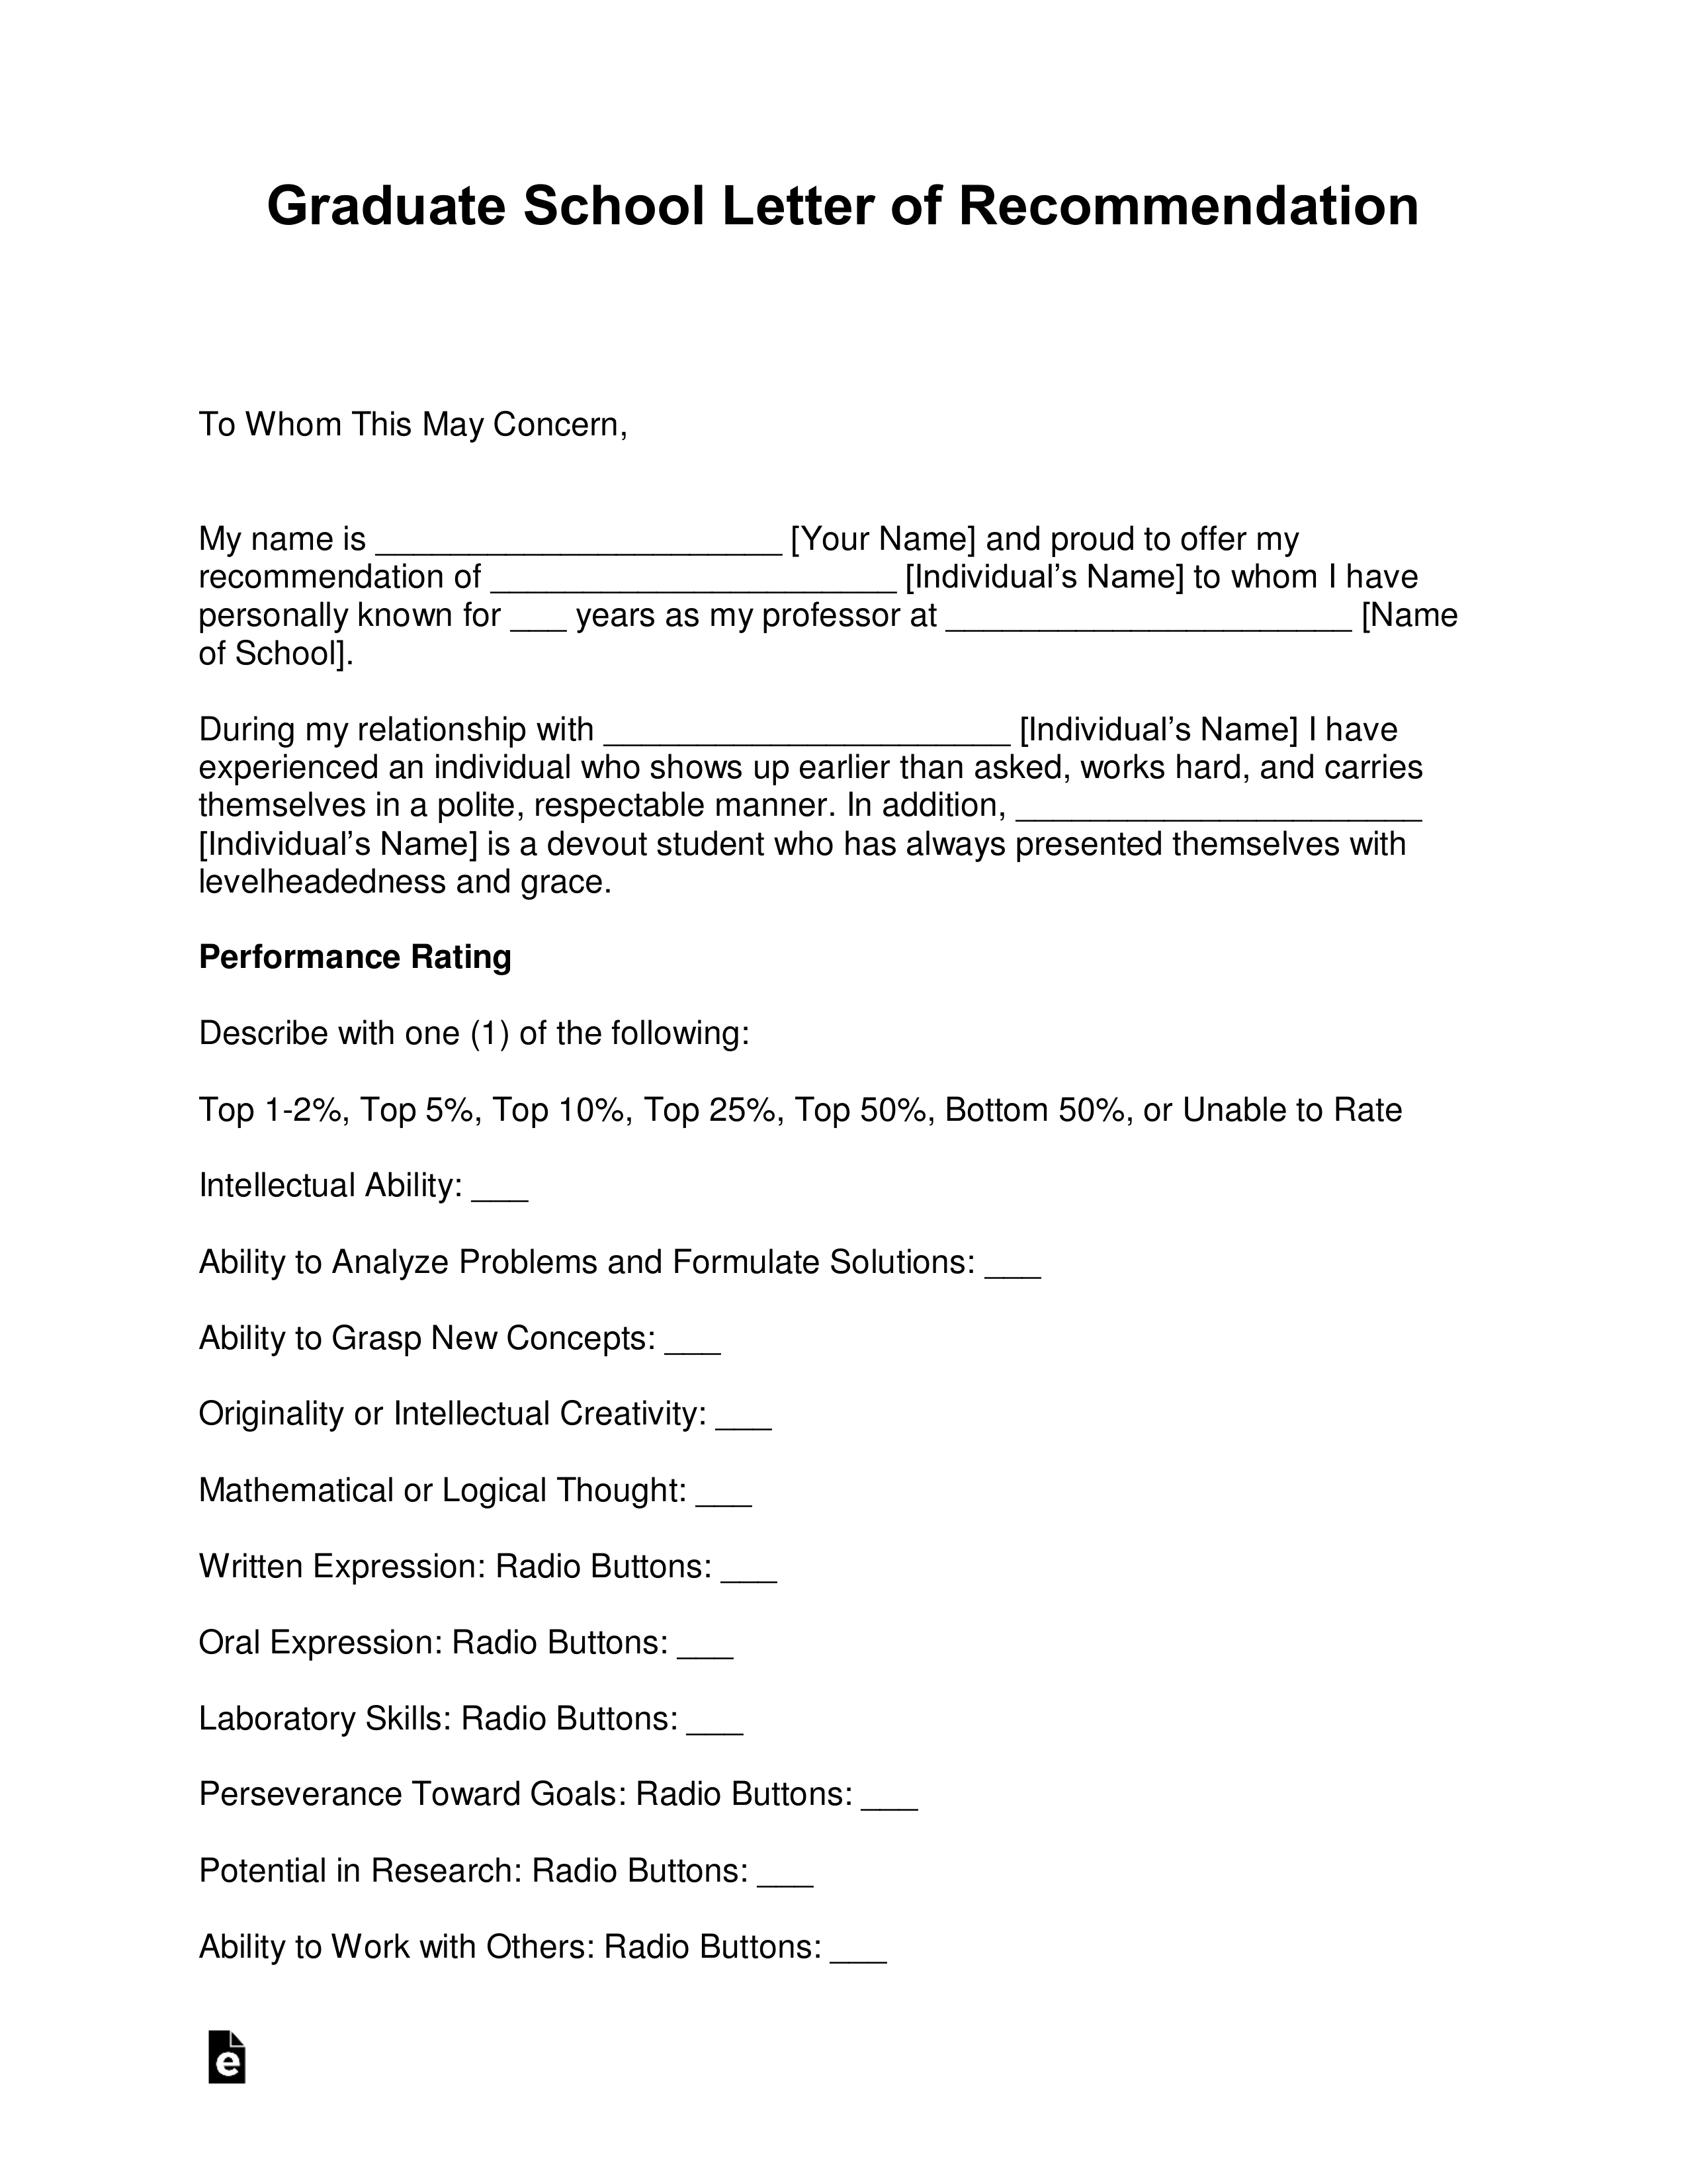 Generic Letter Of Recommendation For Employee from eforms.com